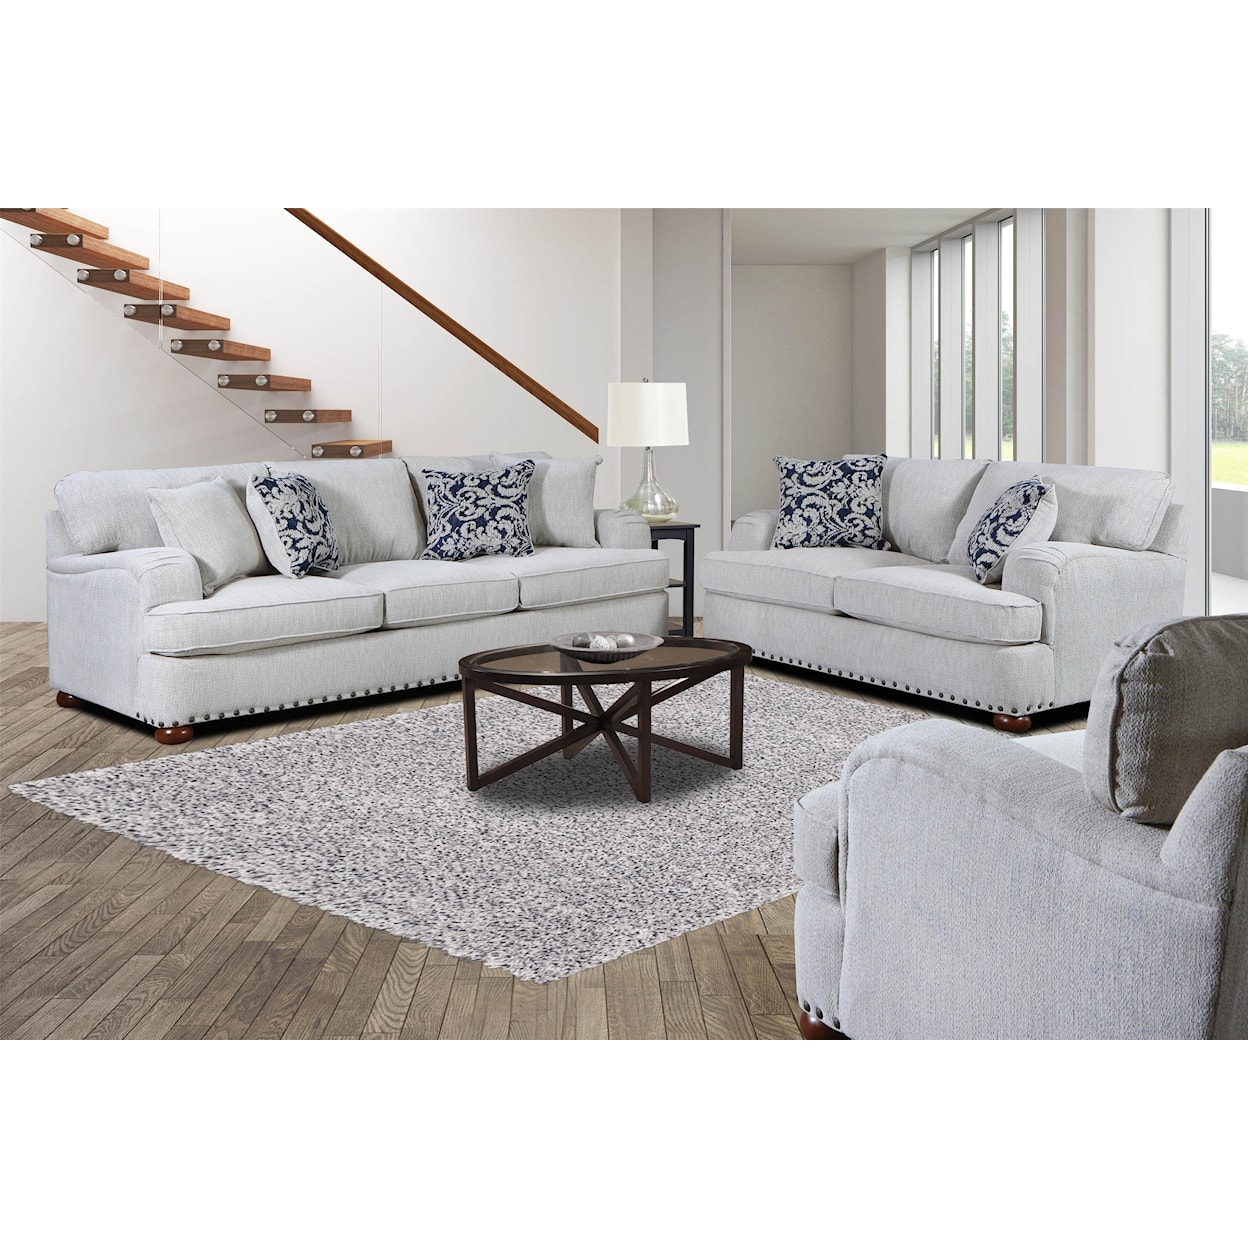 Expressions by VC Magnolia Upholstery Designs Dixon Cream Loveseat